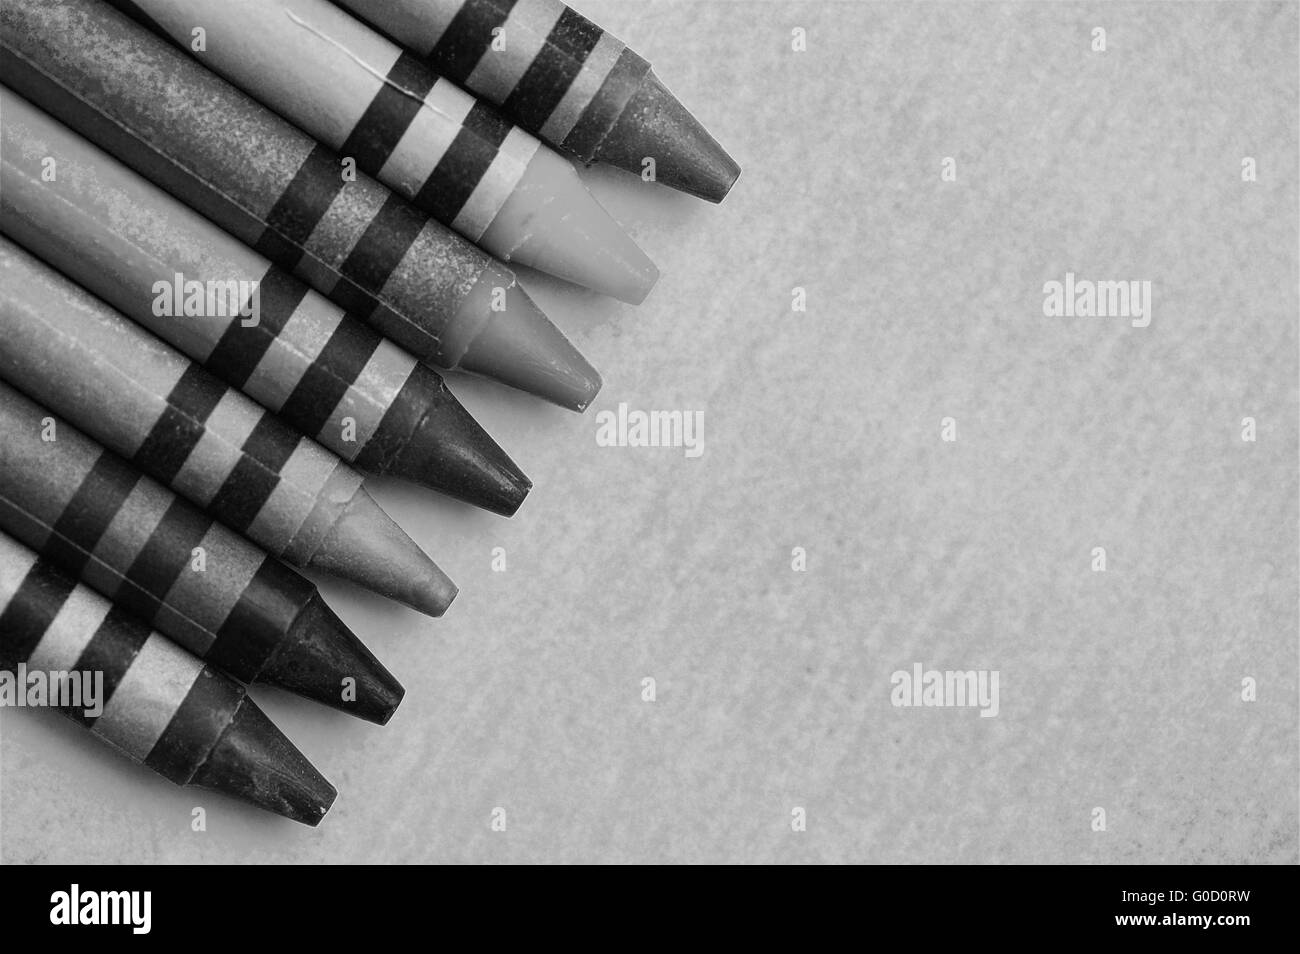 Wax crayons background black and white image Stock Photo